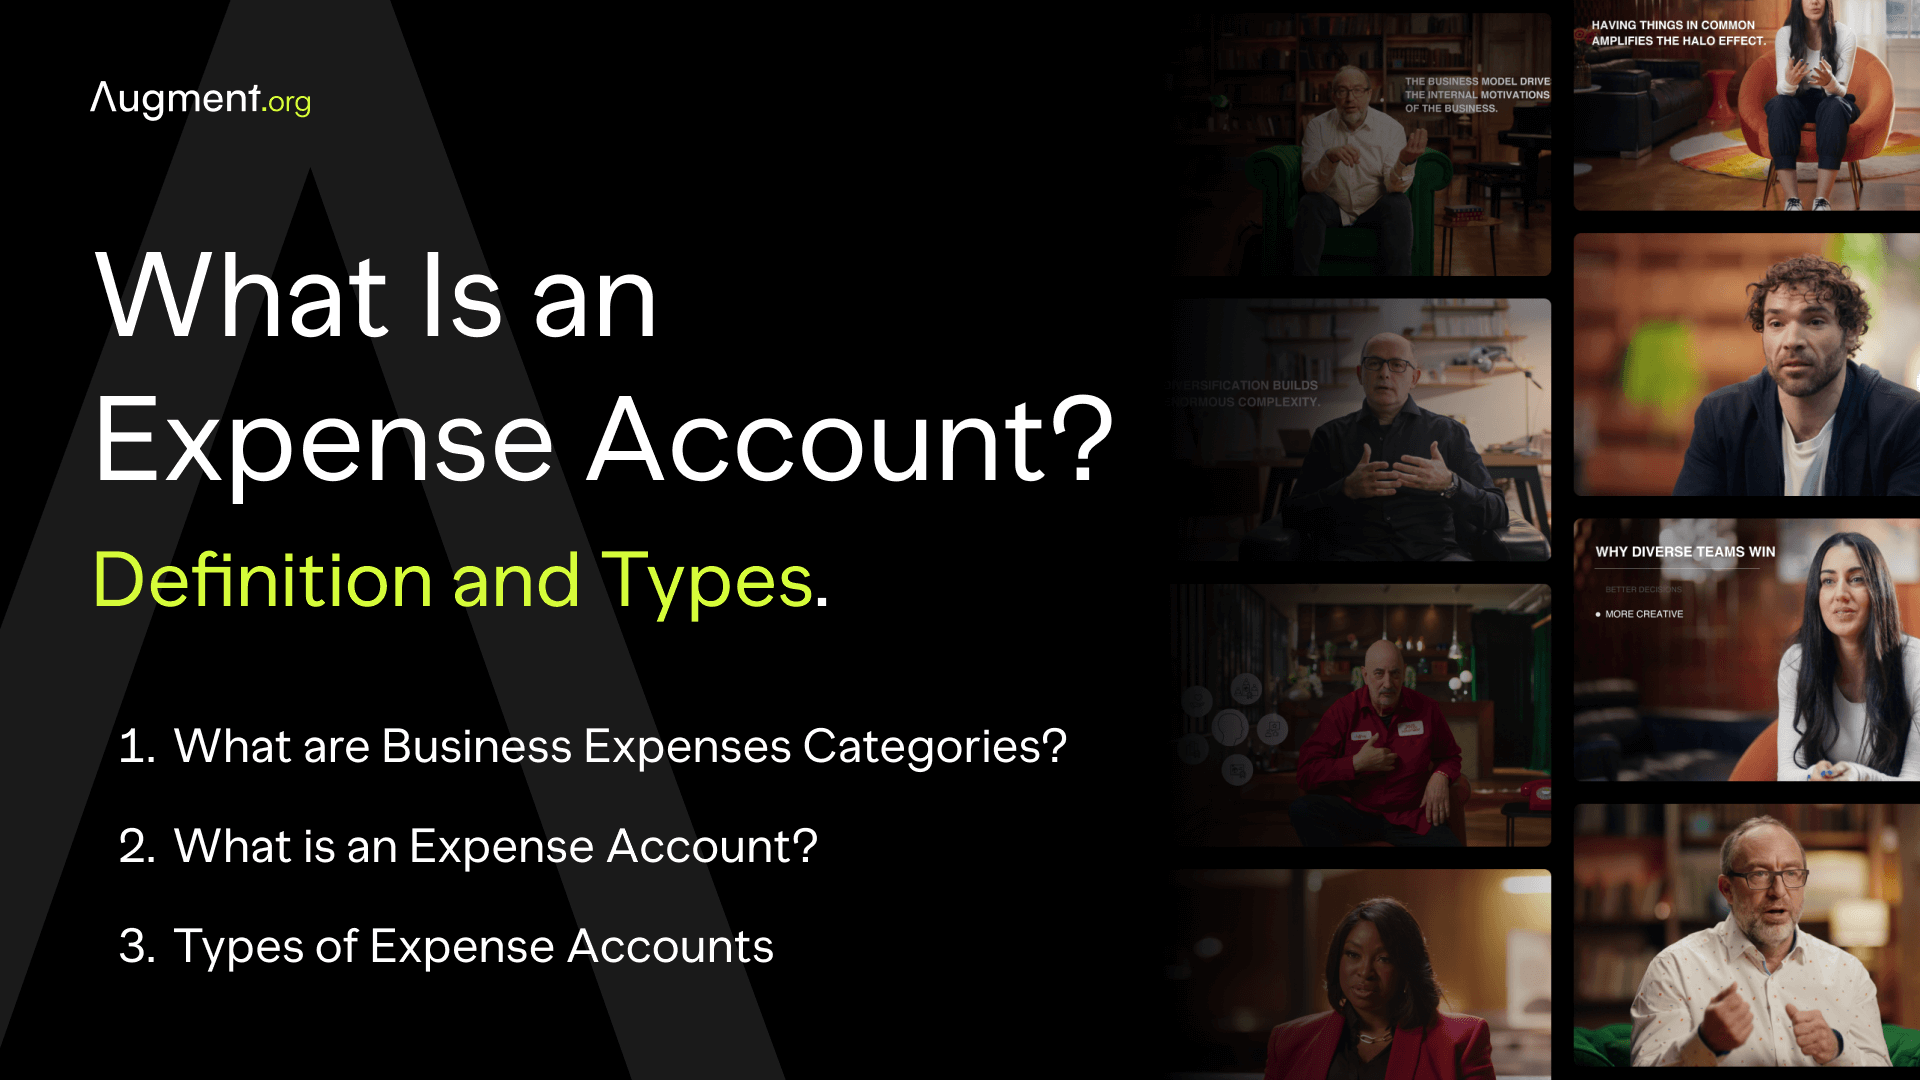 What Is an Expense Account? Definition and Types